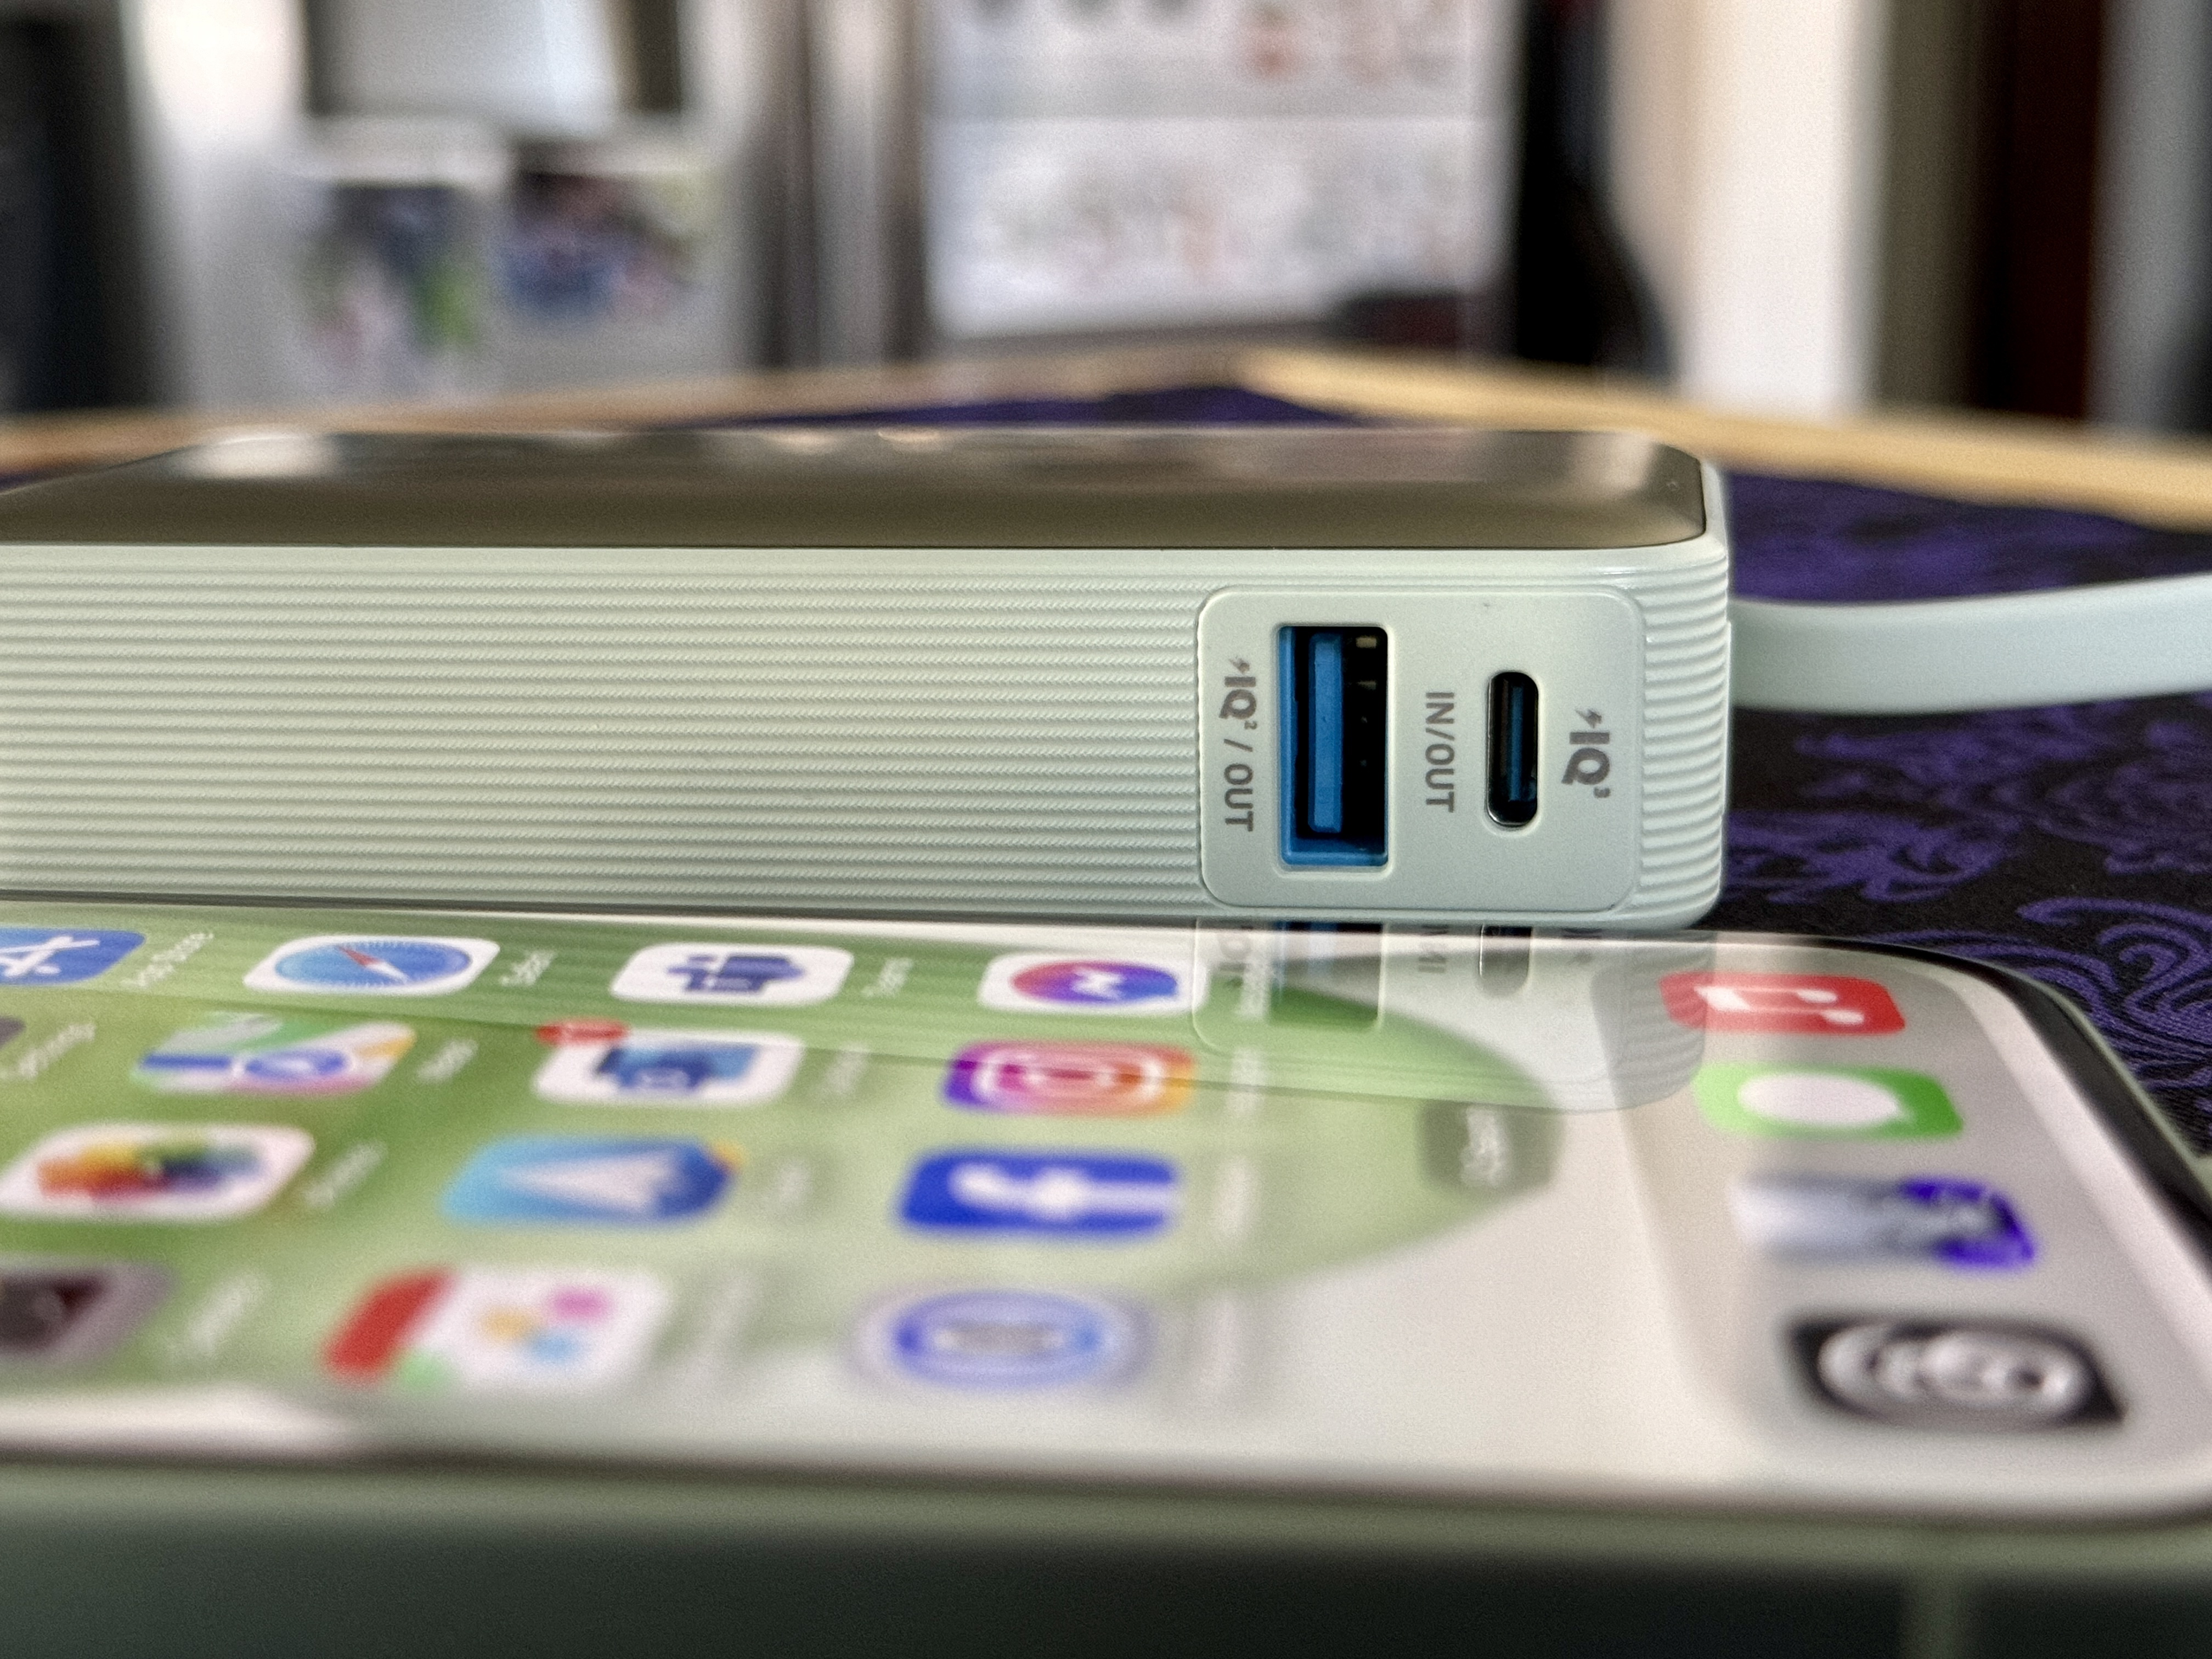 Anker Nano 30W Power Bank with USB-C in green showing the USB-C and USB-A ports.